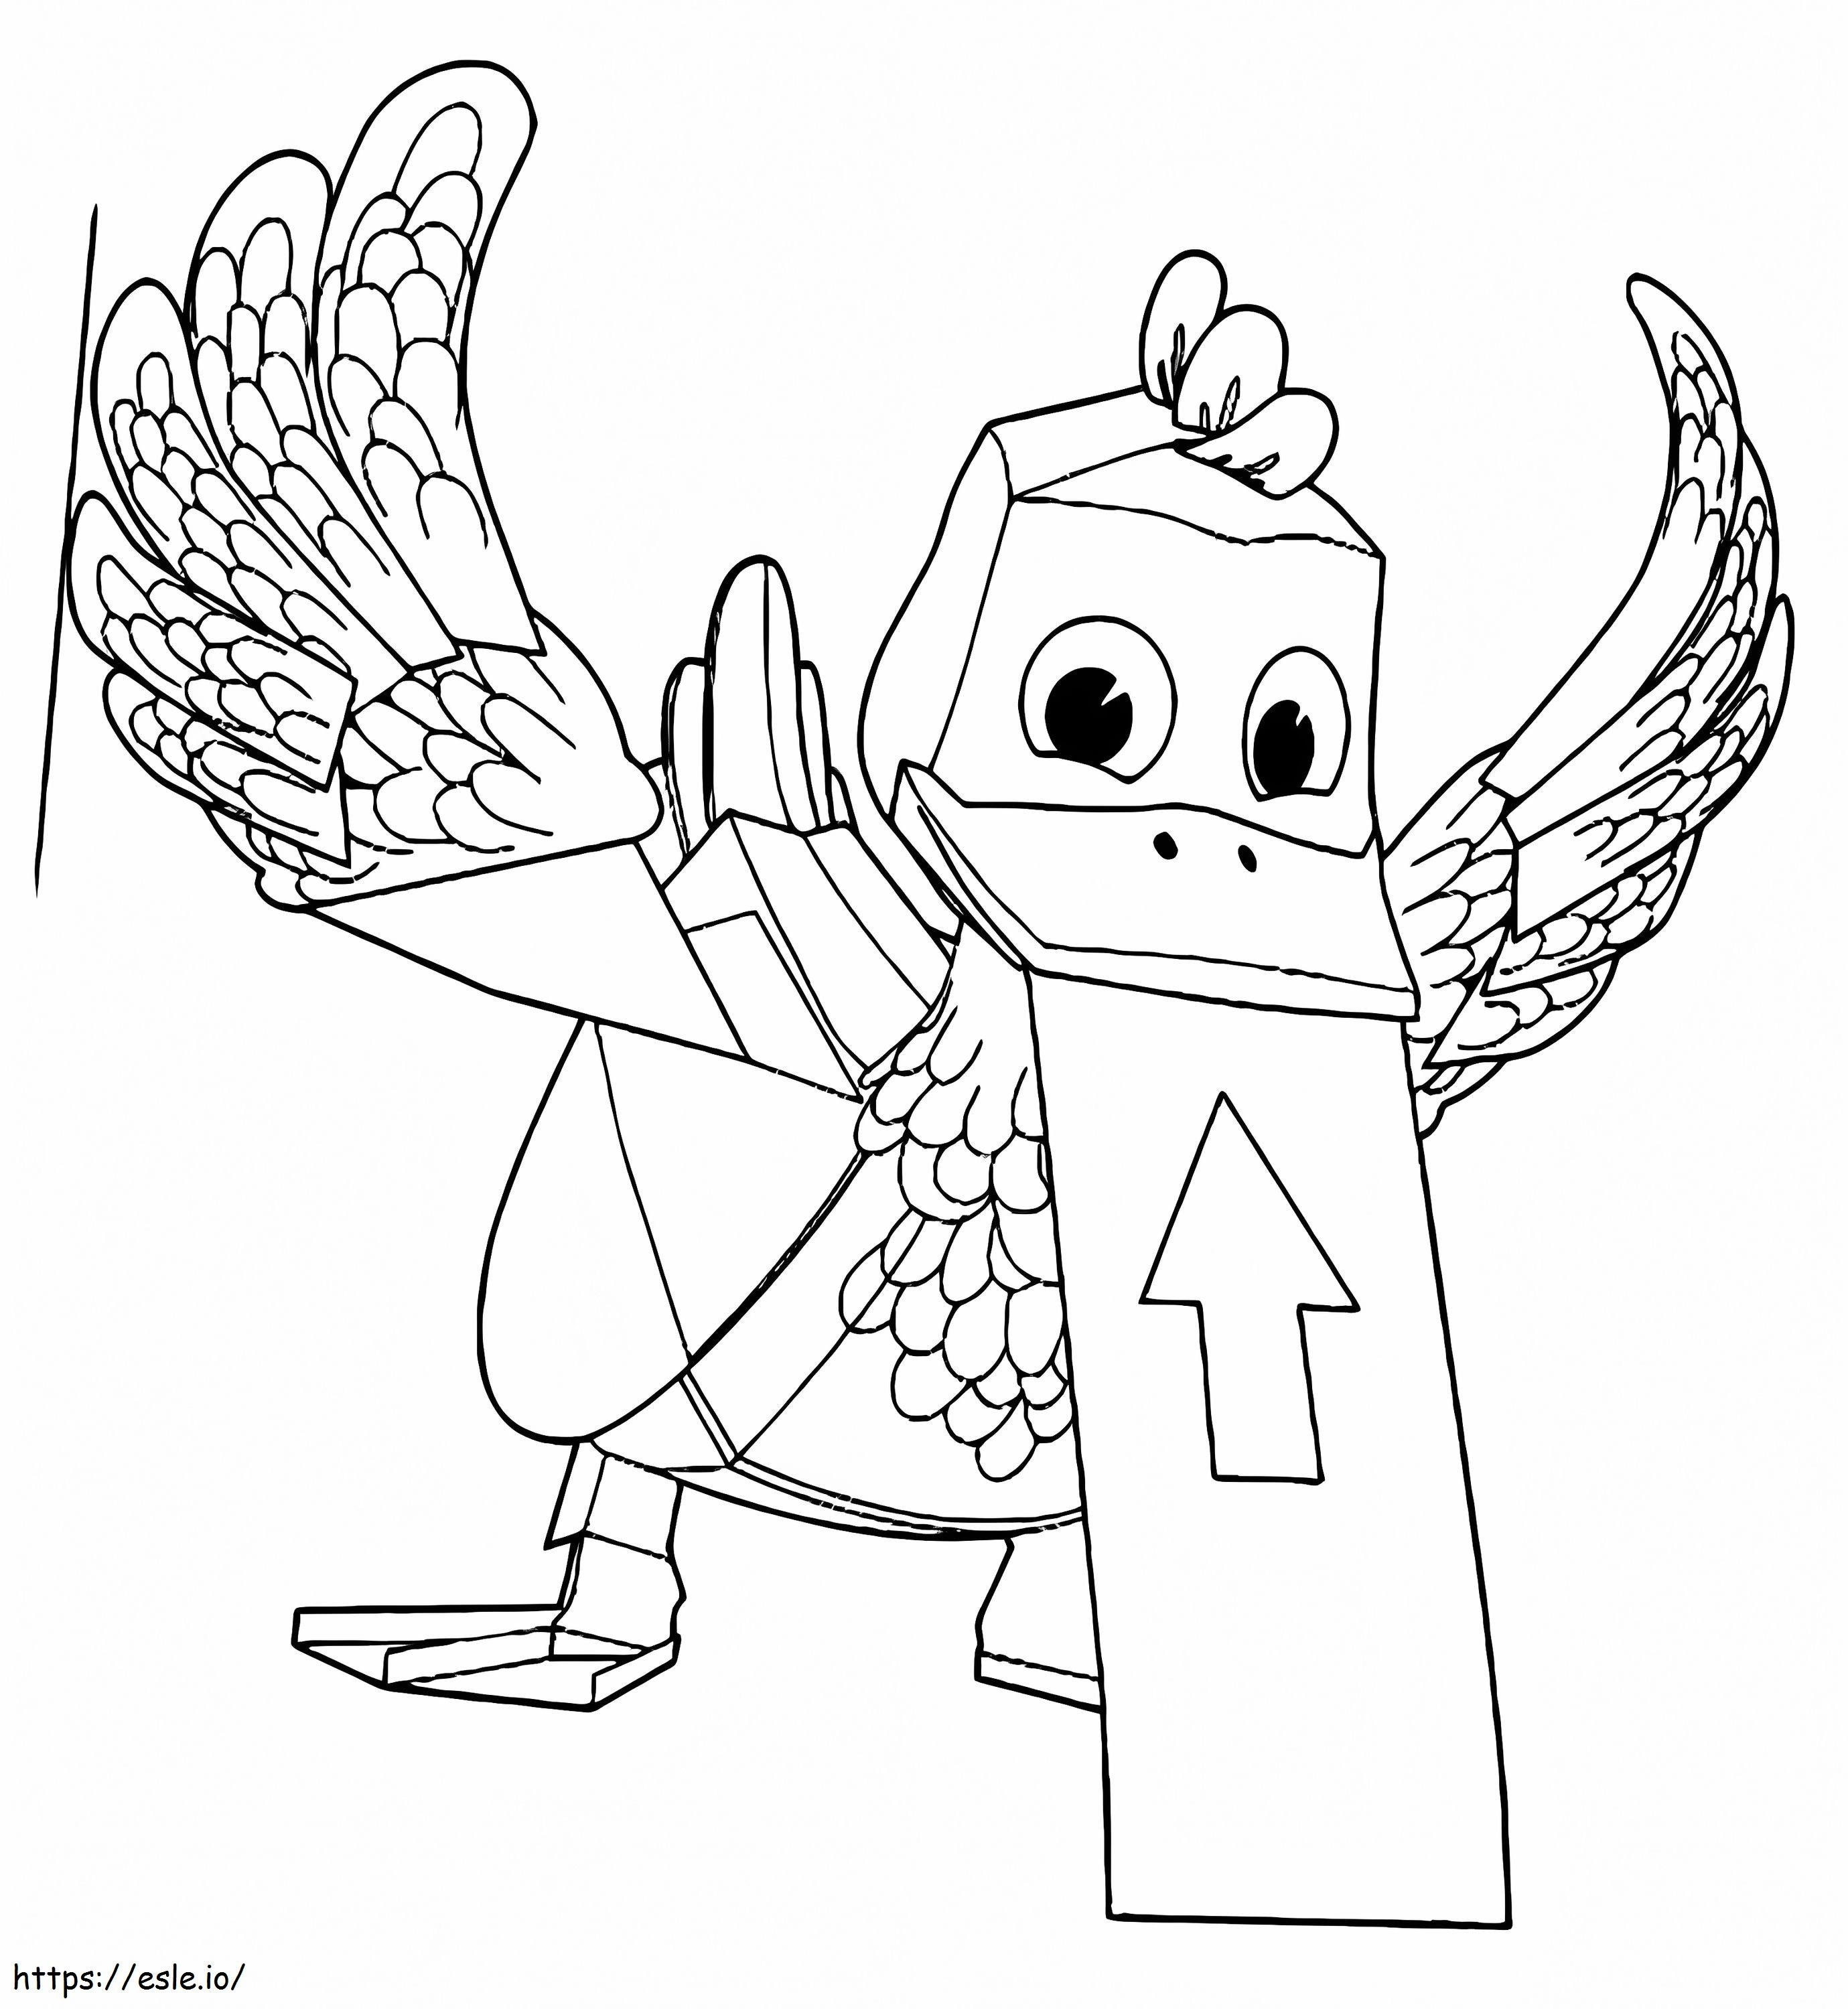 Zack And Quack To Color coloring page